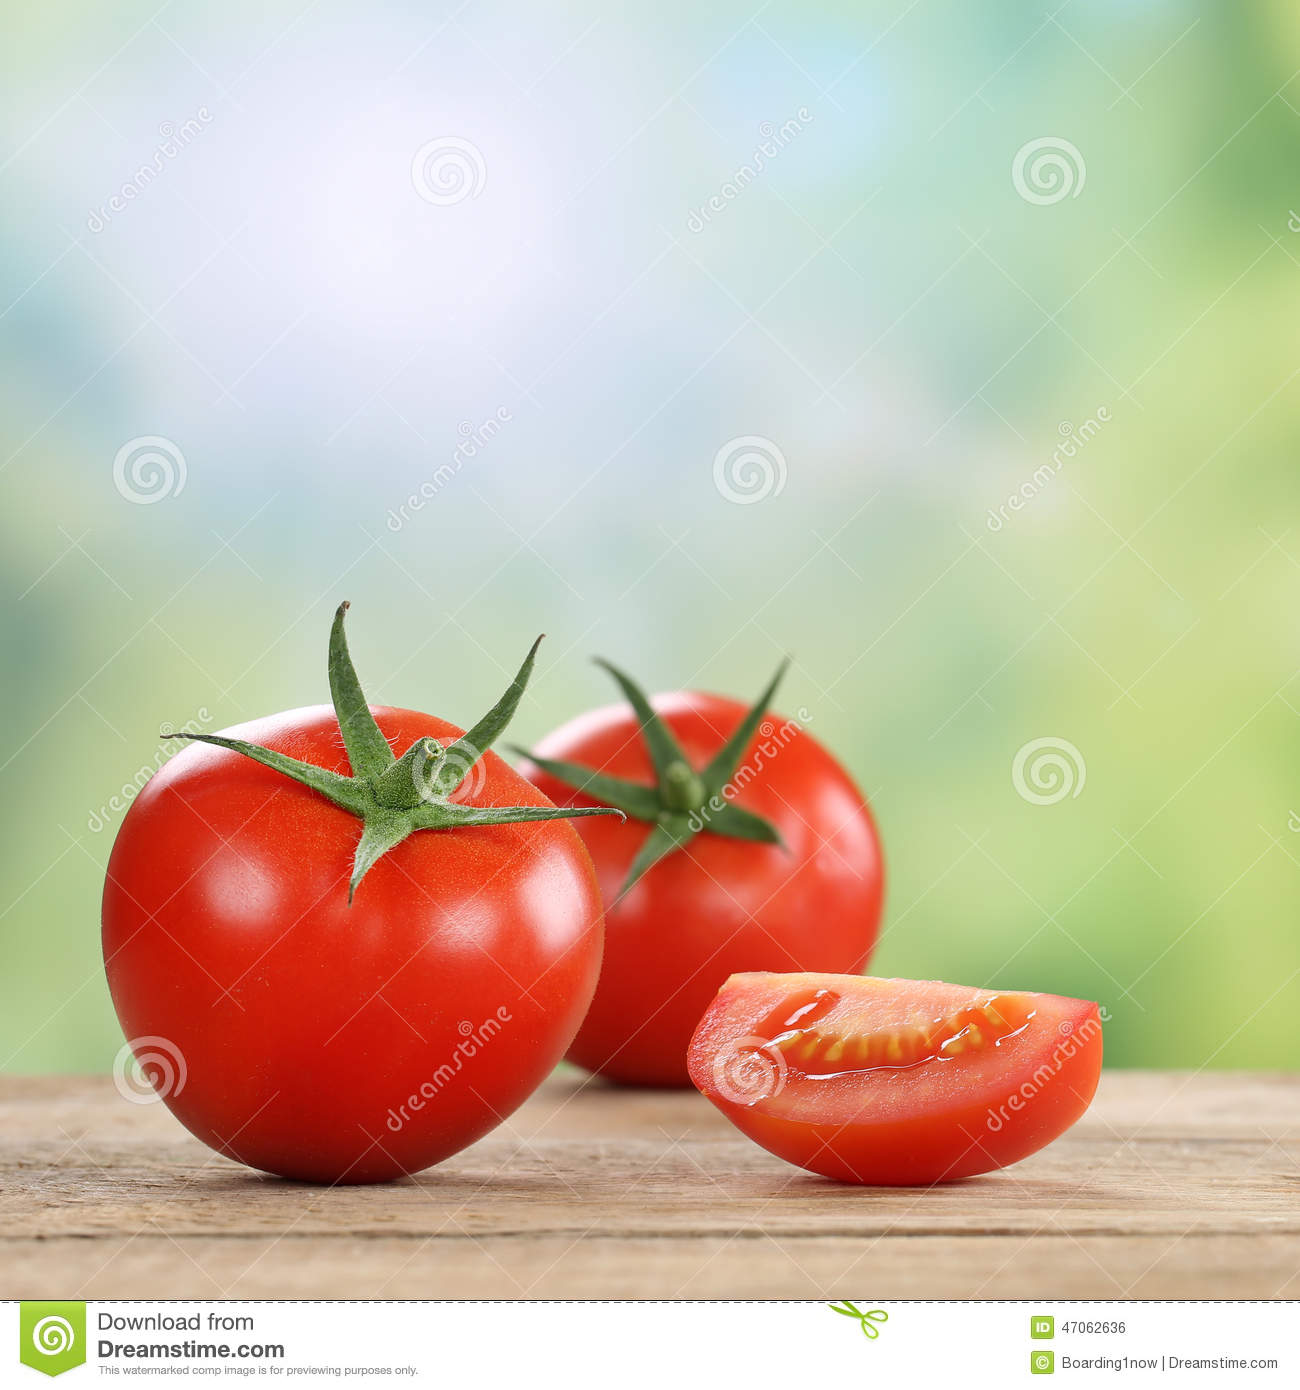 Fresh Tomatoes Vegetables In Summer On A Wooden Board